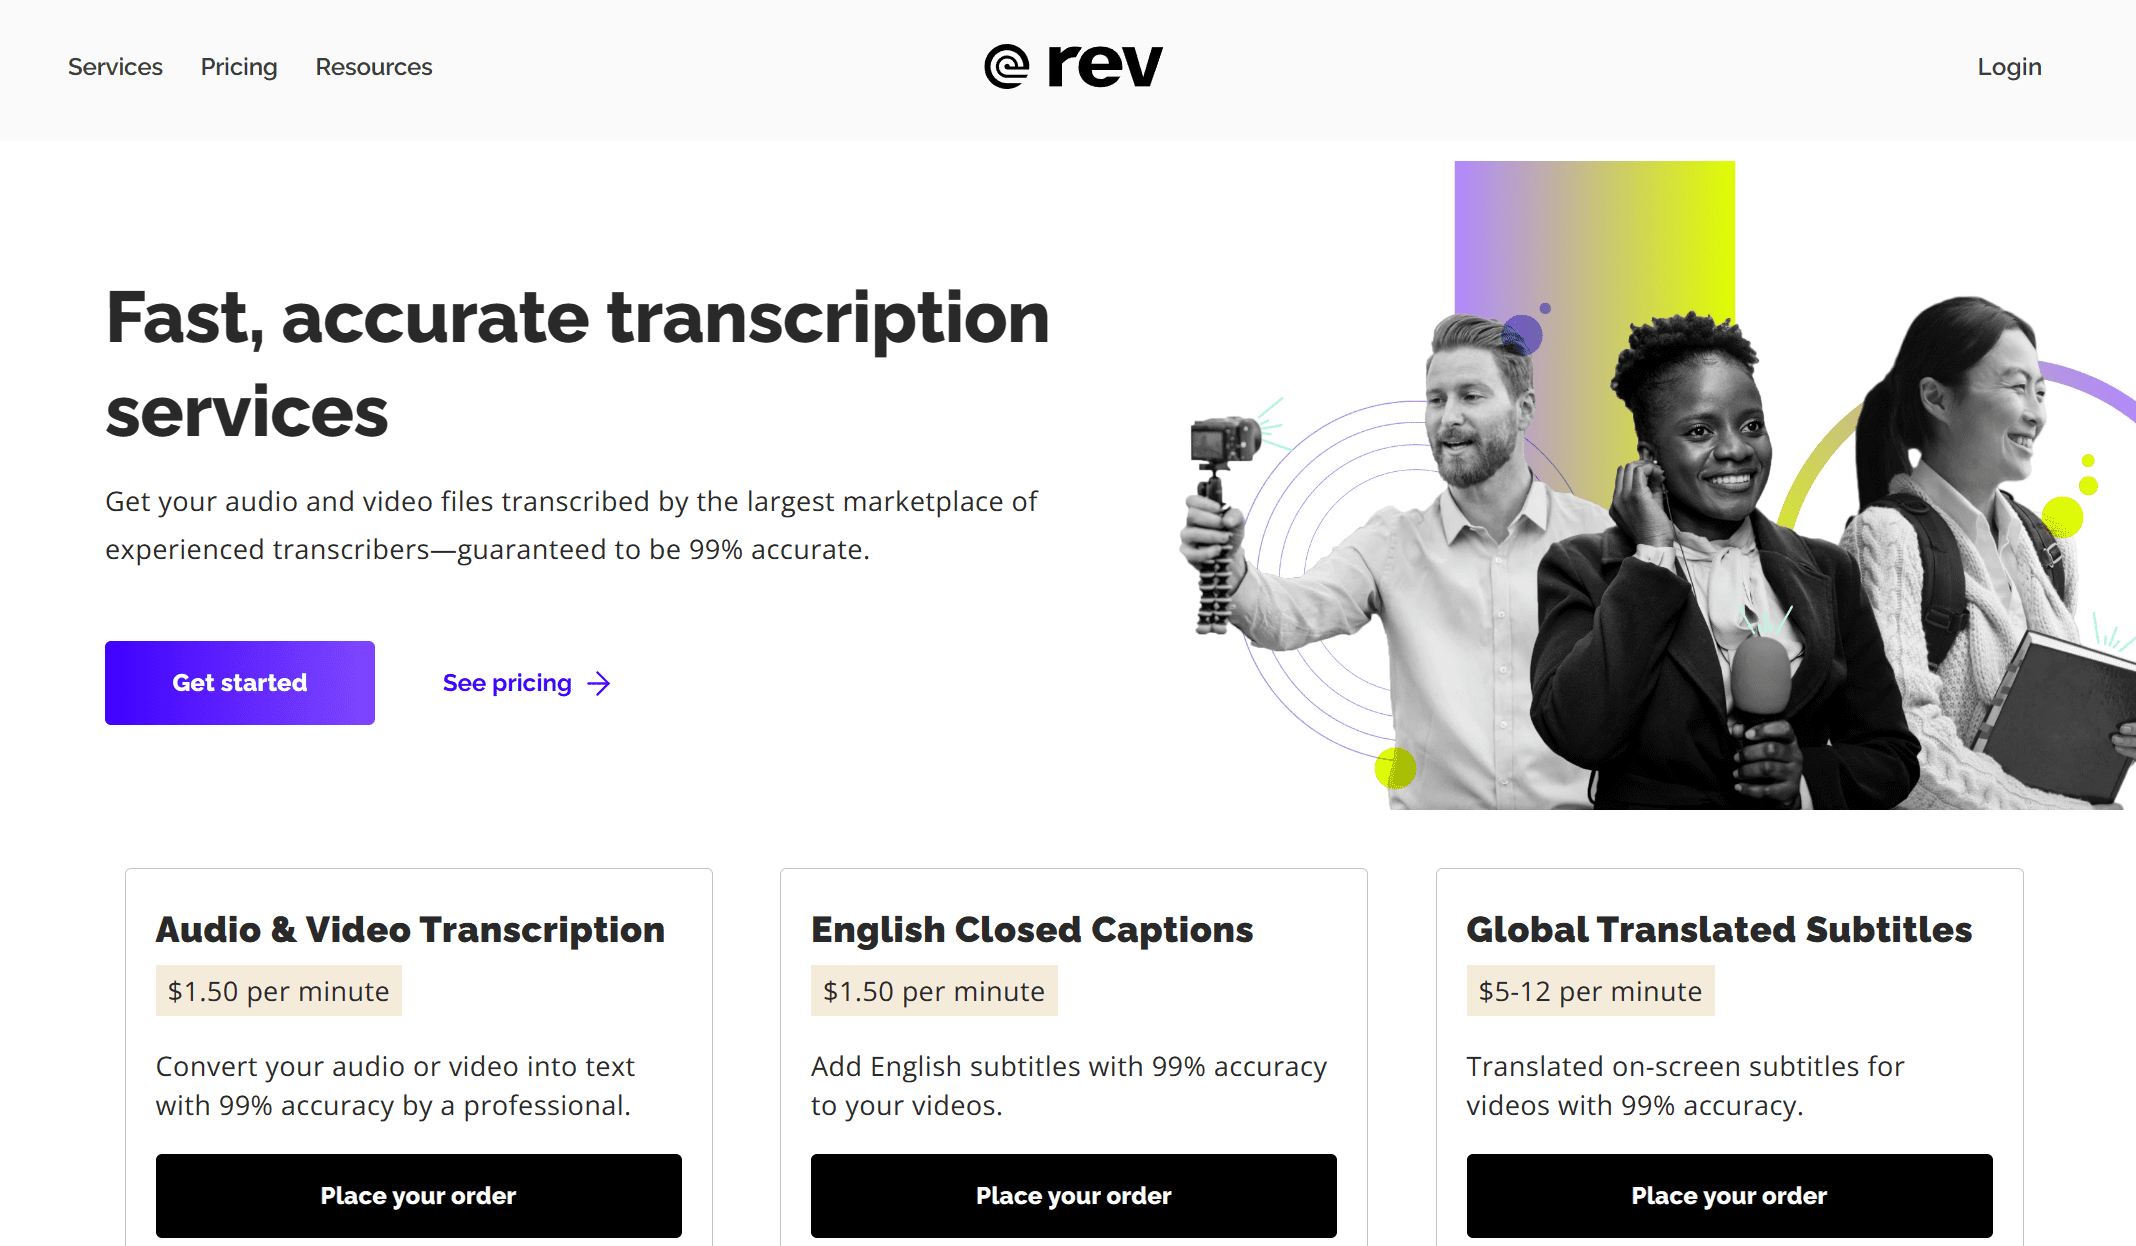 Rev is the self-acclaimed best meeting transcription software. Agree?